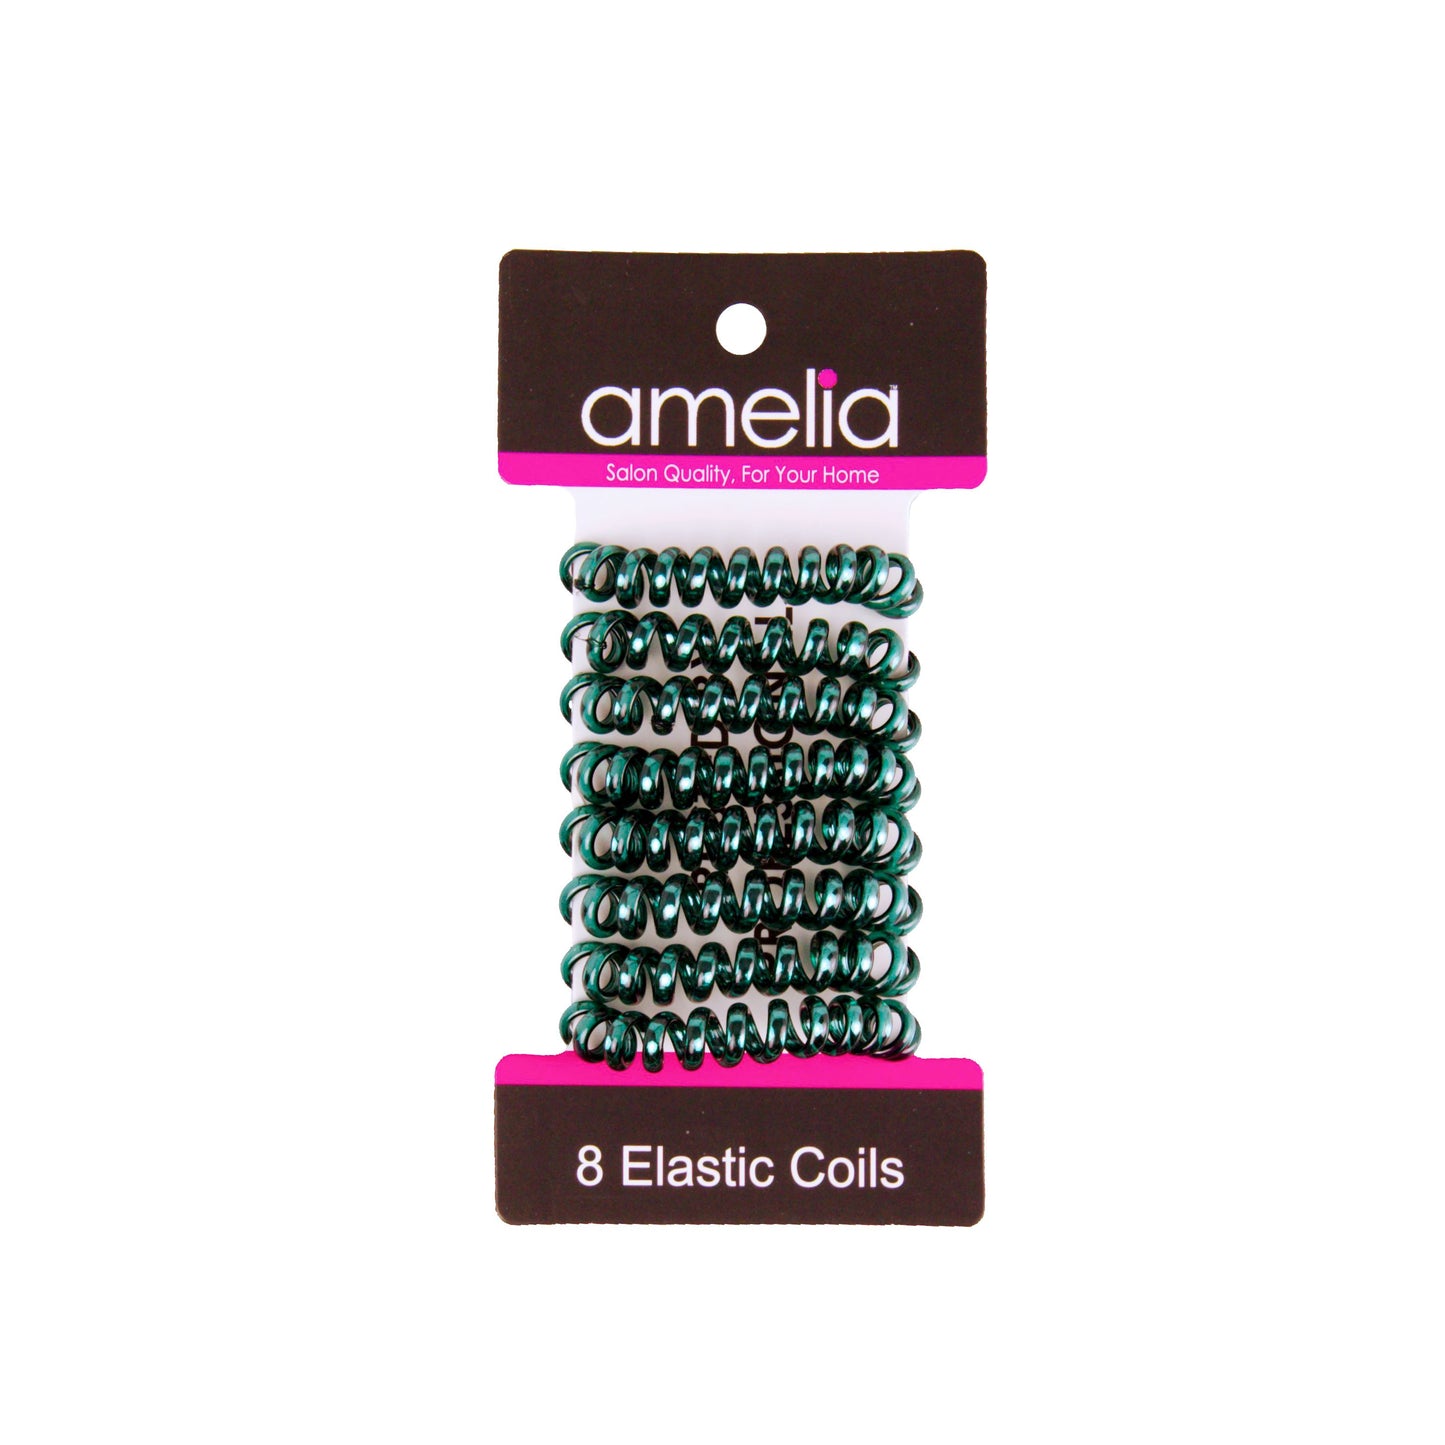 Amelia Beauty, 8 Small Shinny Elastic Hair Telephone Cord Coils, 1.5in Diameter Spiral Hair Ties, Strong Hold, Gentle on Hair, Green